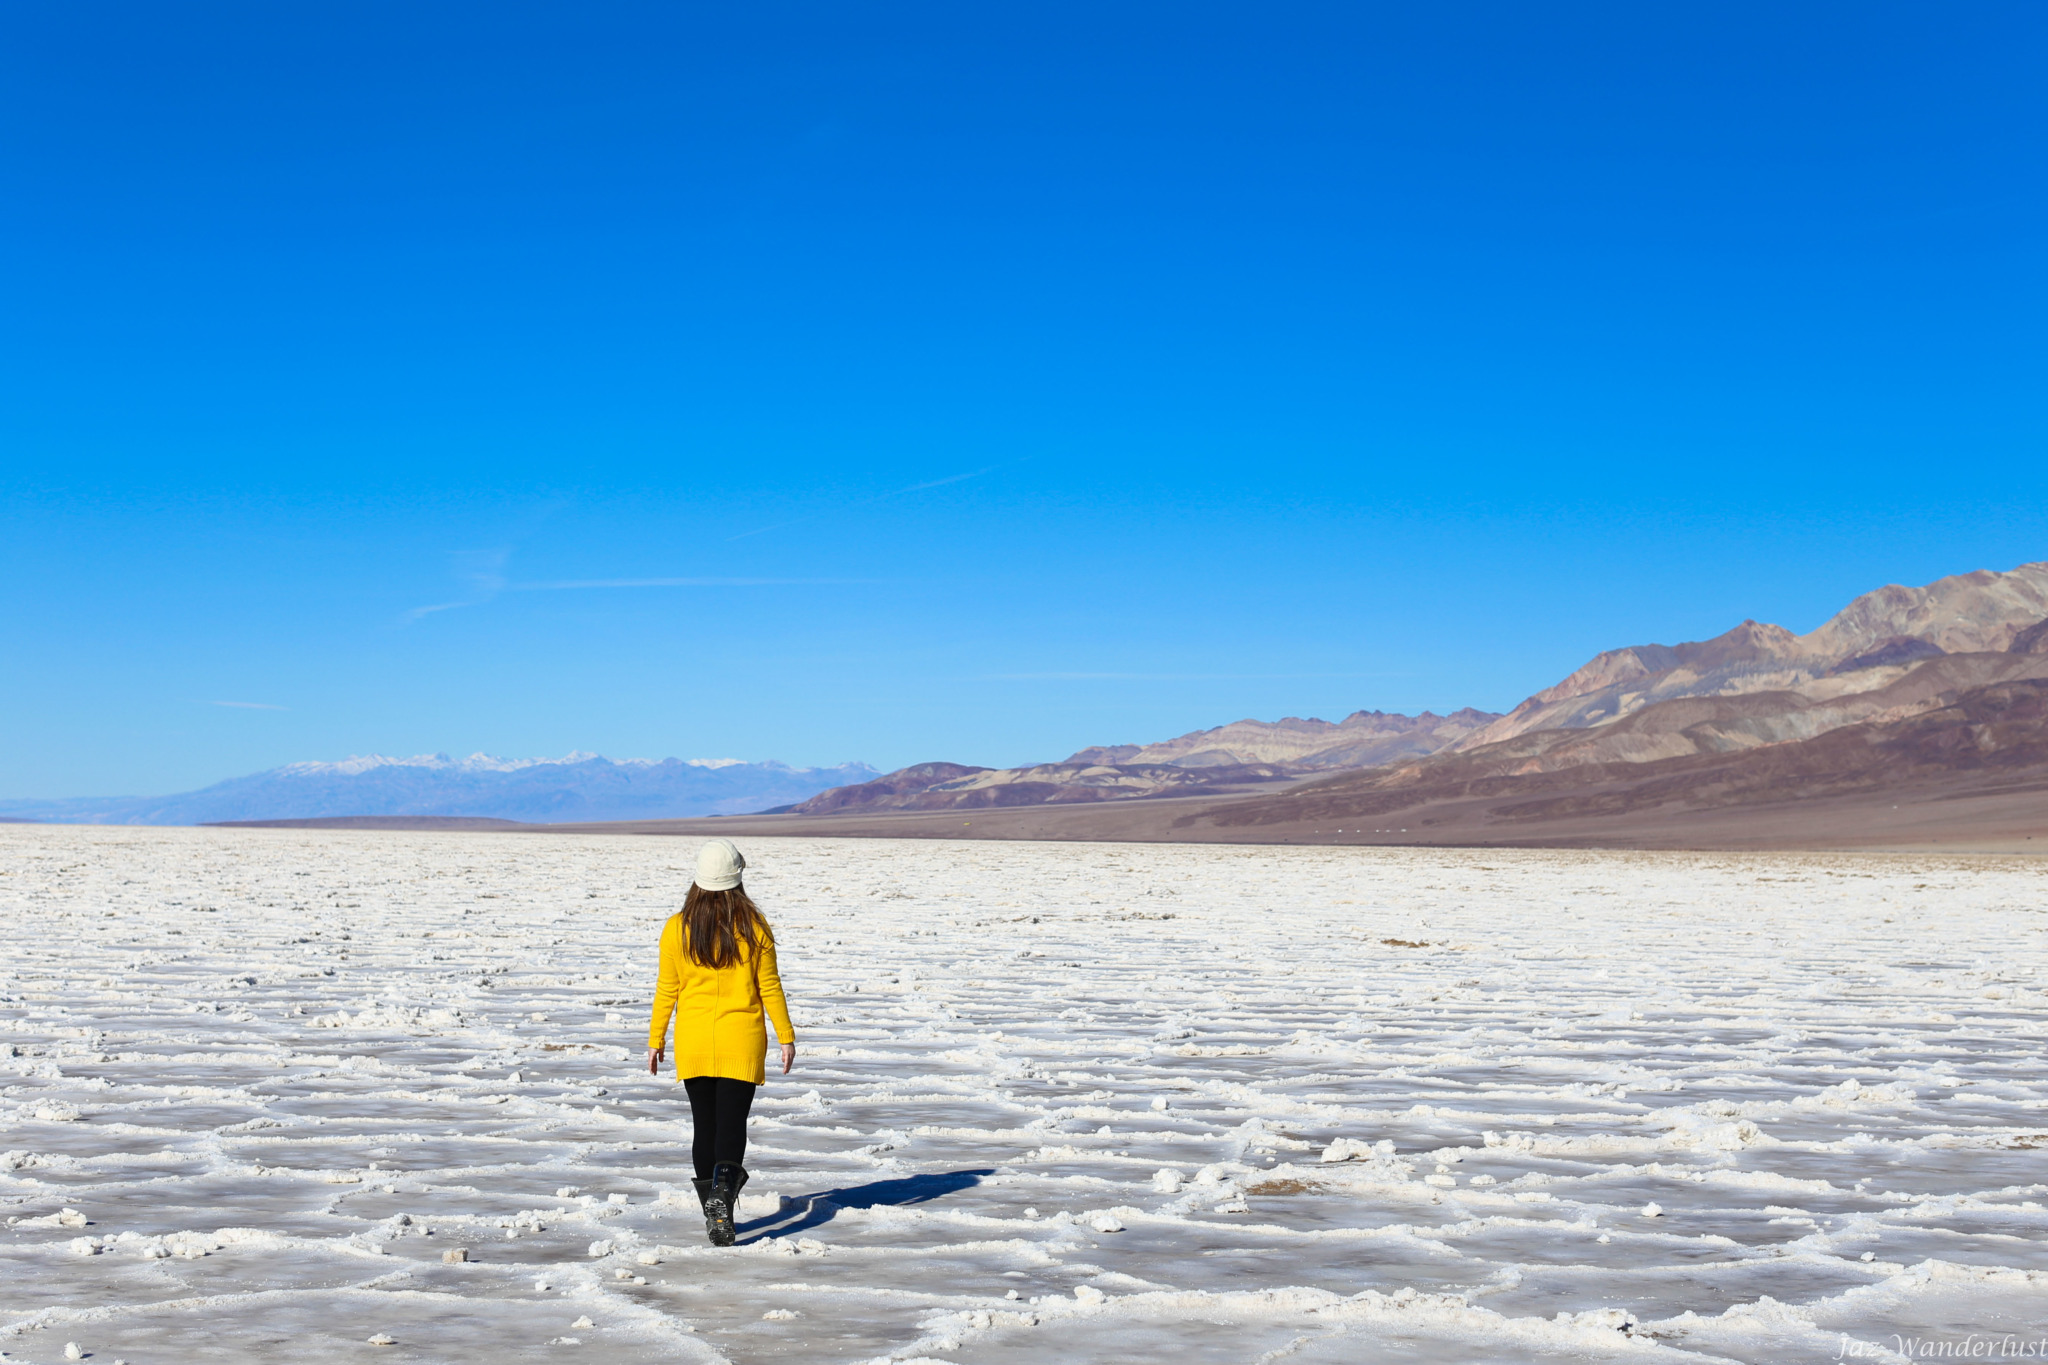 Badwater Basin in Death Valley National Park. Photography by Jaz Wanderlust.